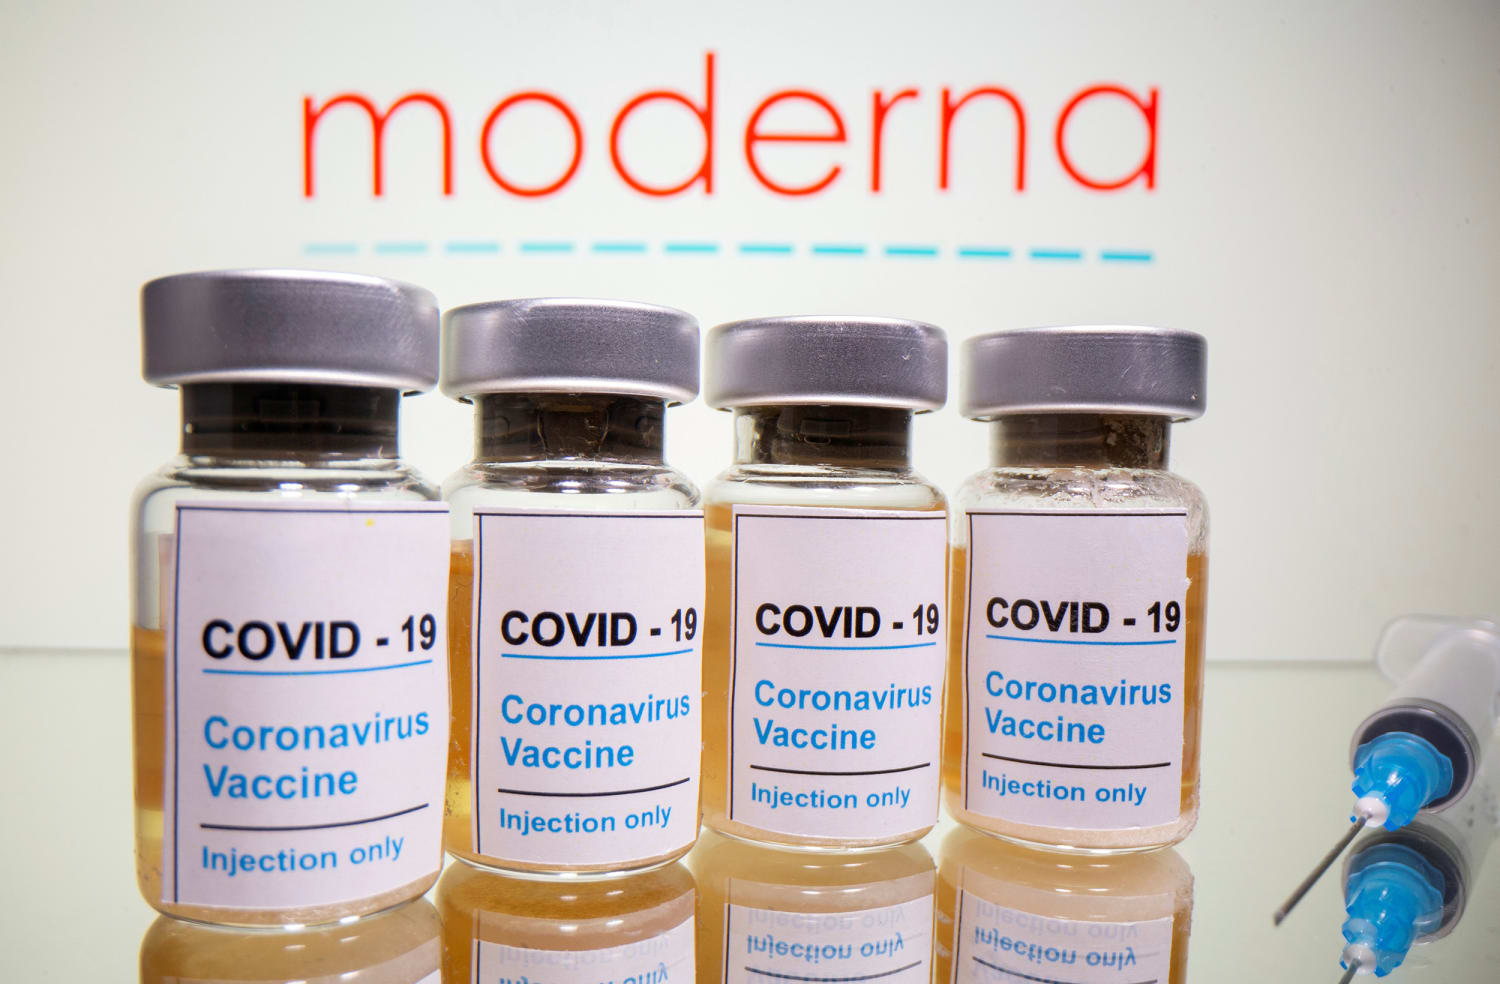 Covid-19 vaccine candidate 94.5 percent effective, Moderna says